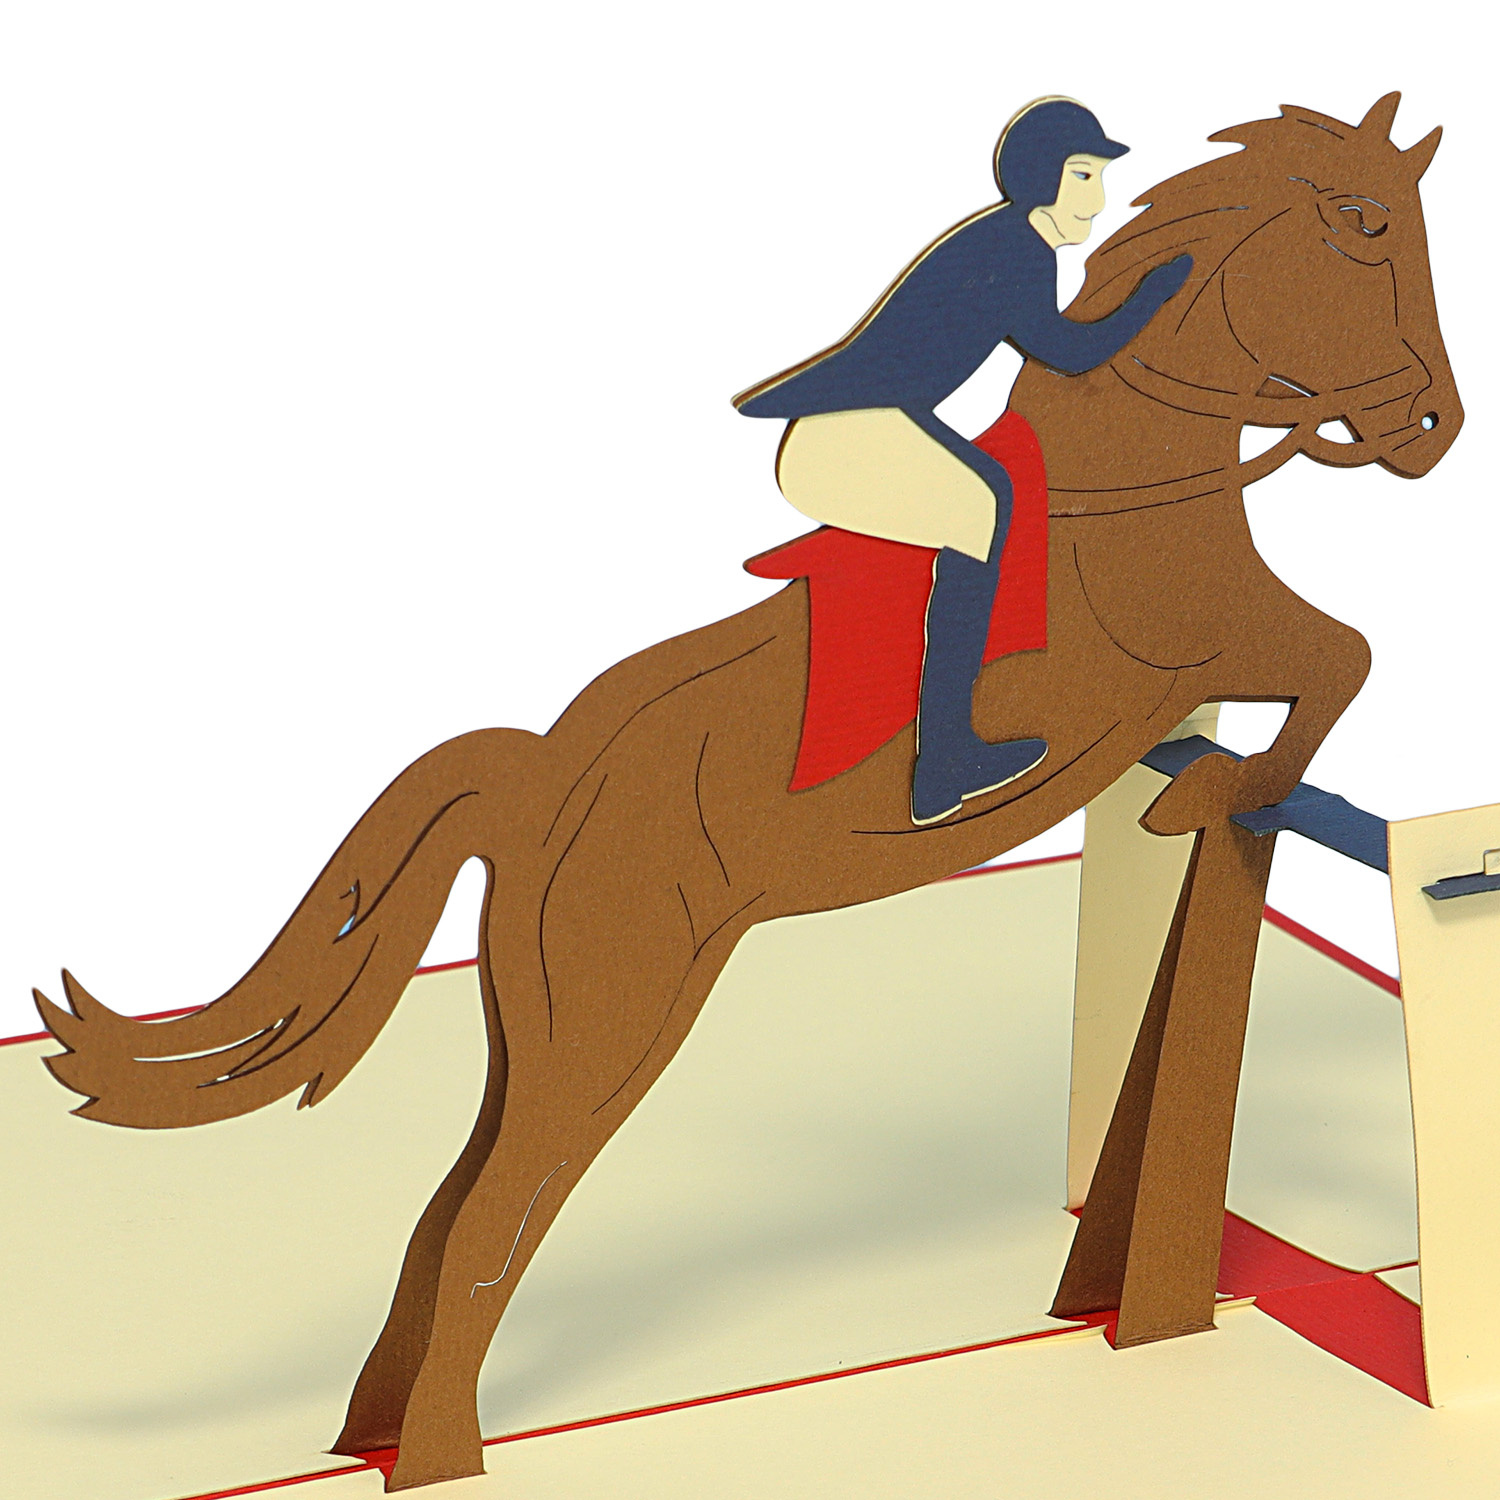 LINPOPUP Pop Up 3D Card, Birthday Card, Greeting Card, Equestrian, Horses, Riders, Riding, LIN17510, LINPopUp®, N273